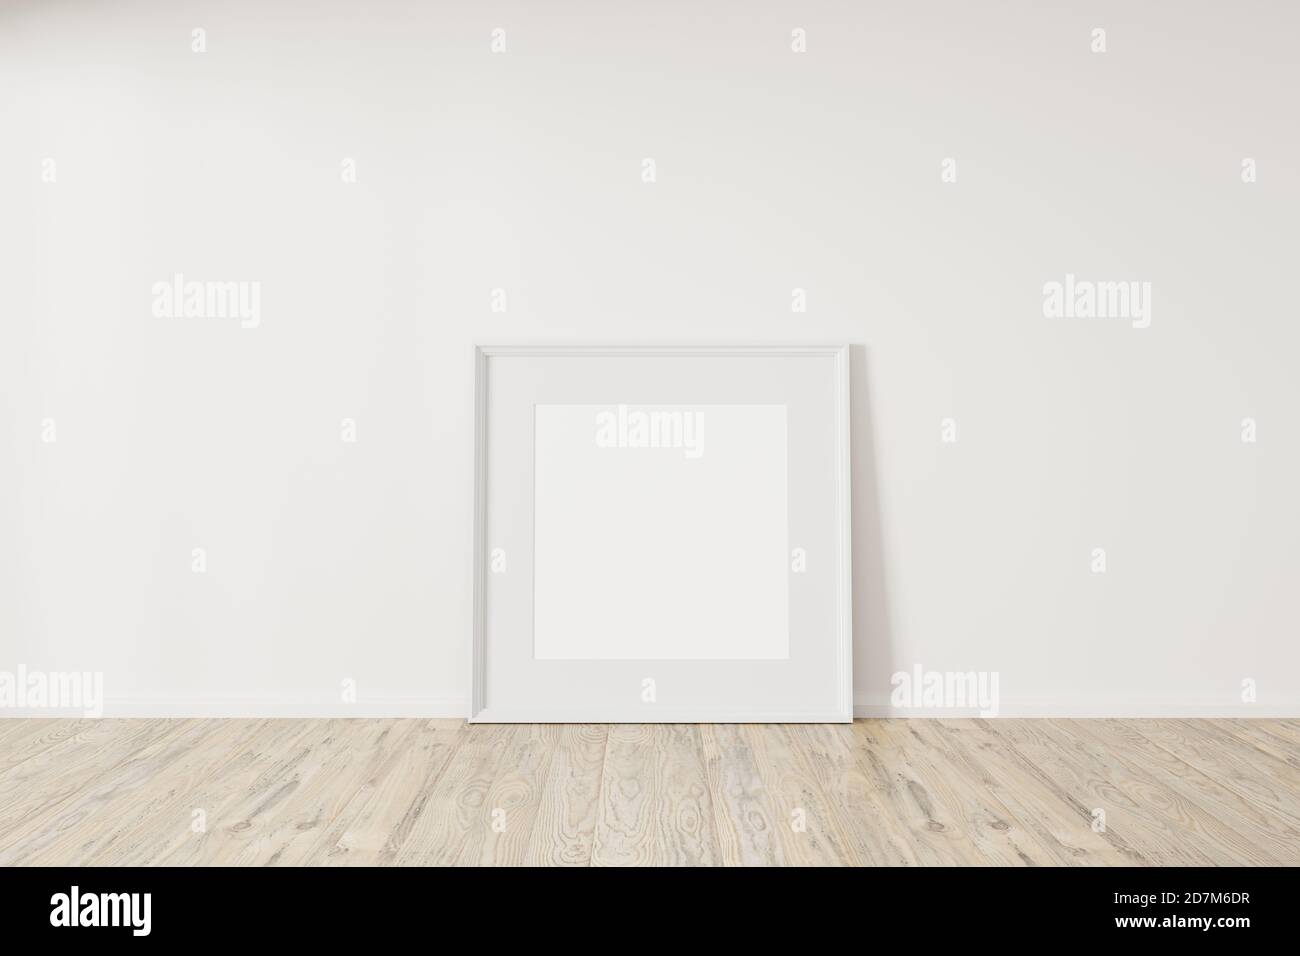 Horizontall wood frame mock up. Wooden frame poster on wooden floor with white wall. Landscape frame 3d illustrations. Stock Photo